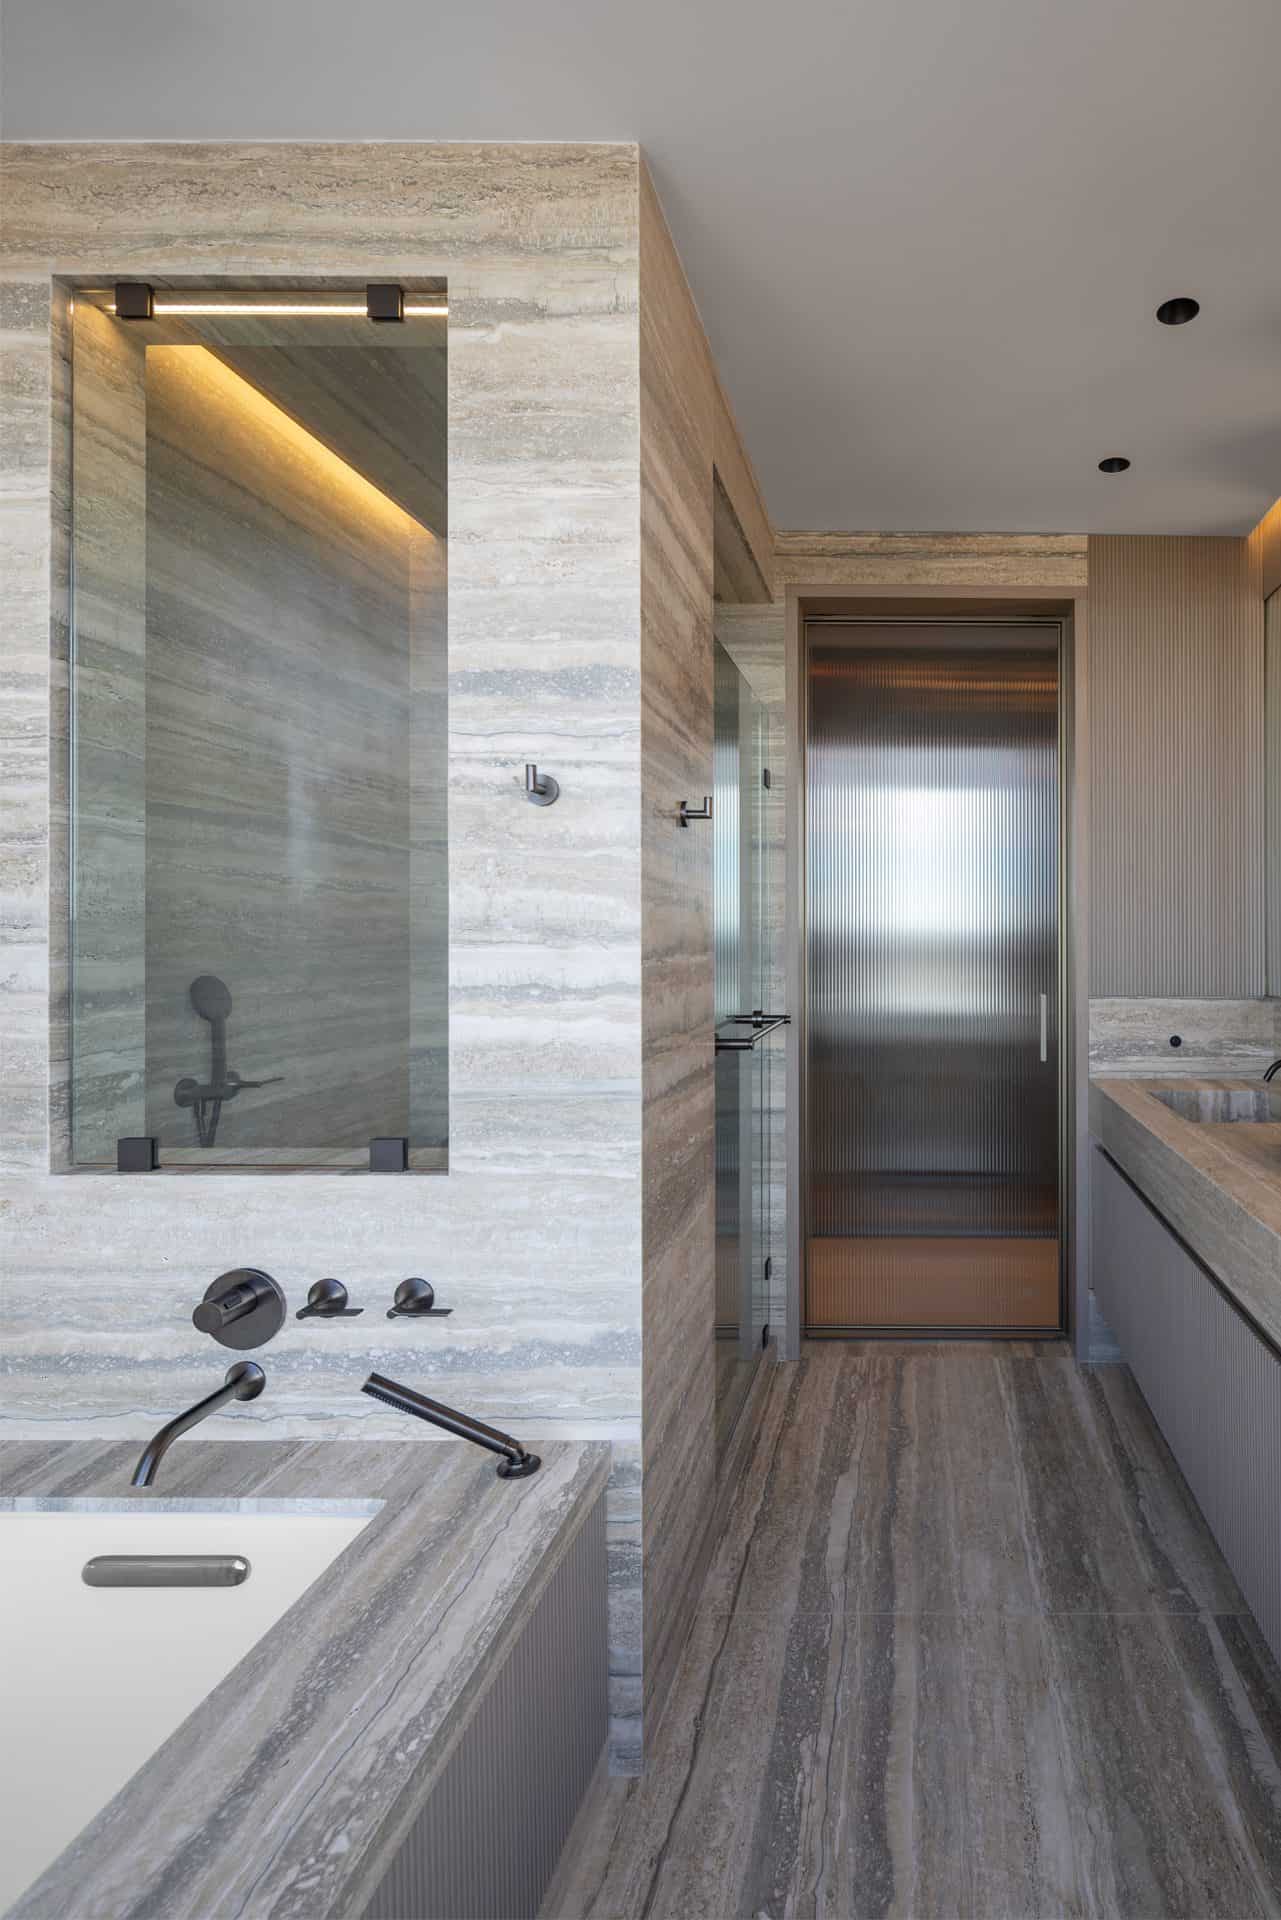 Earth-toned bathroom with Bilotta double sink vanity, pocket glass door, view of stand alone tub and enclosed shower.